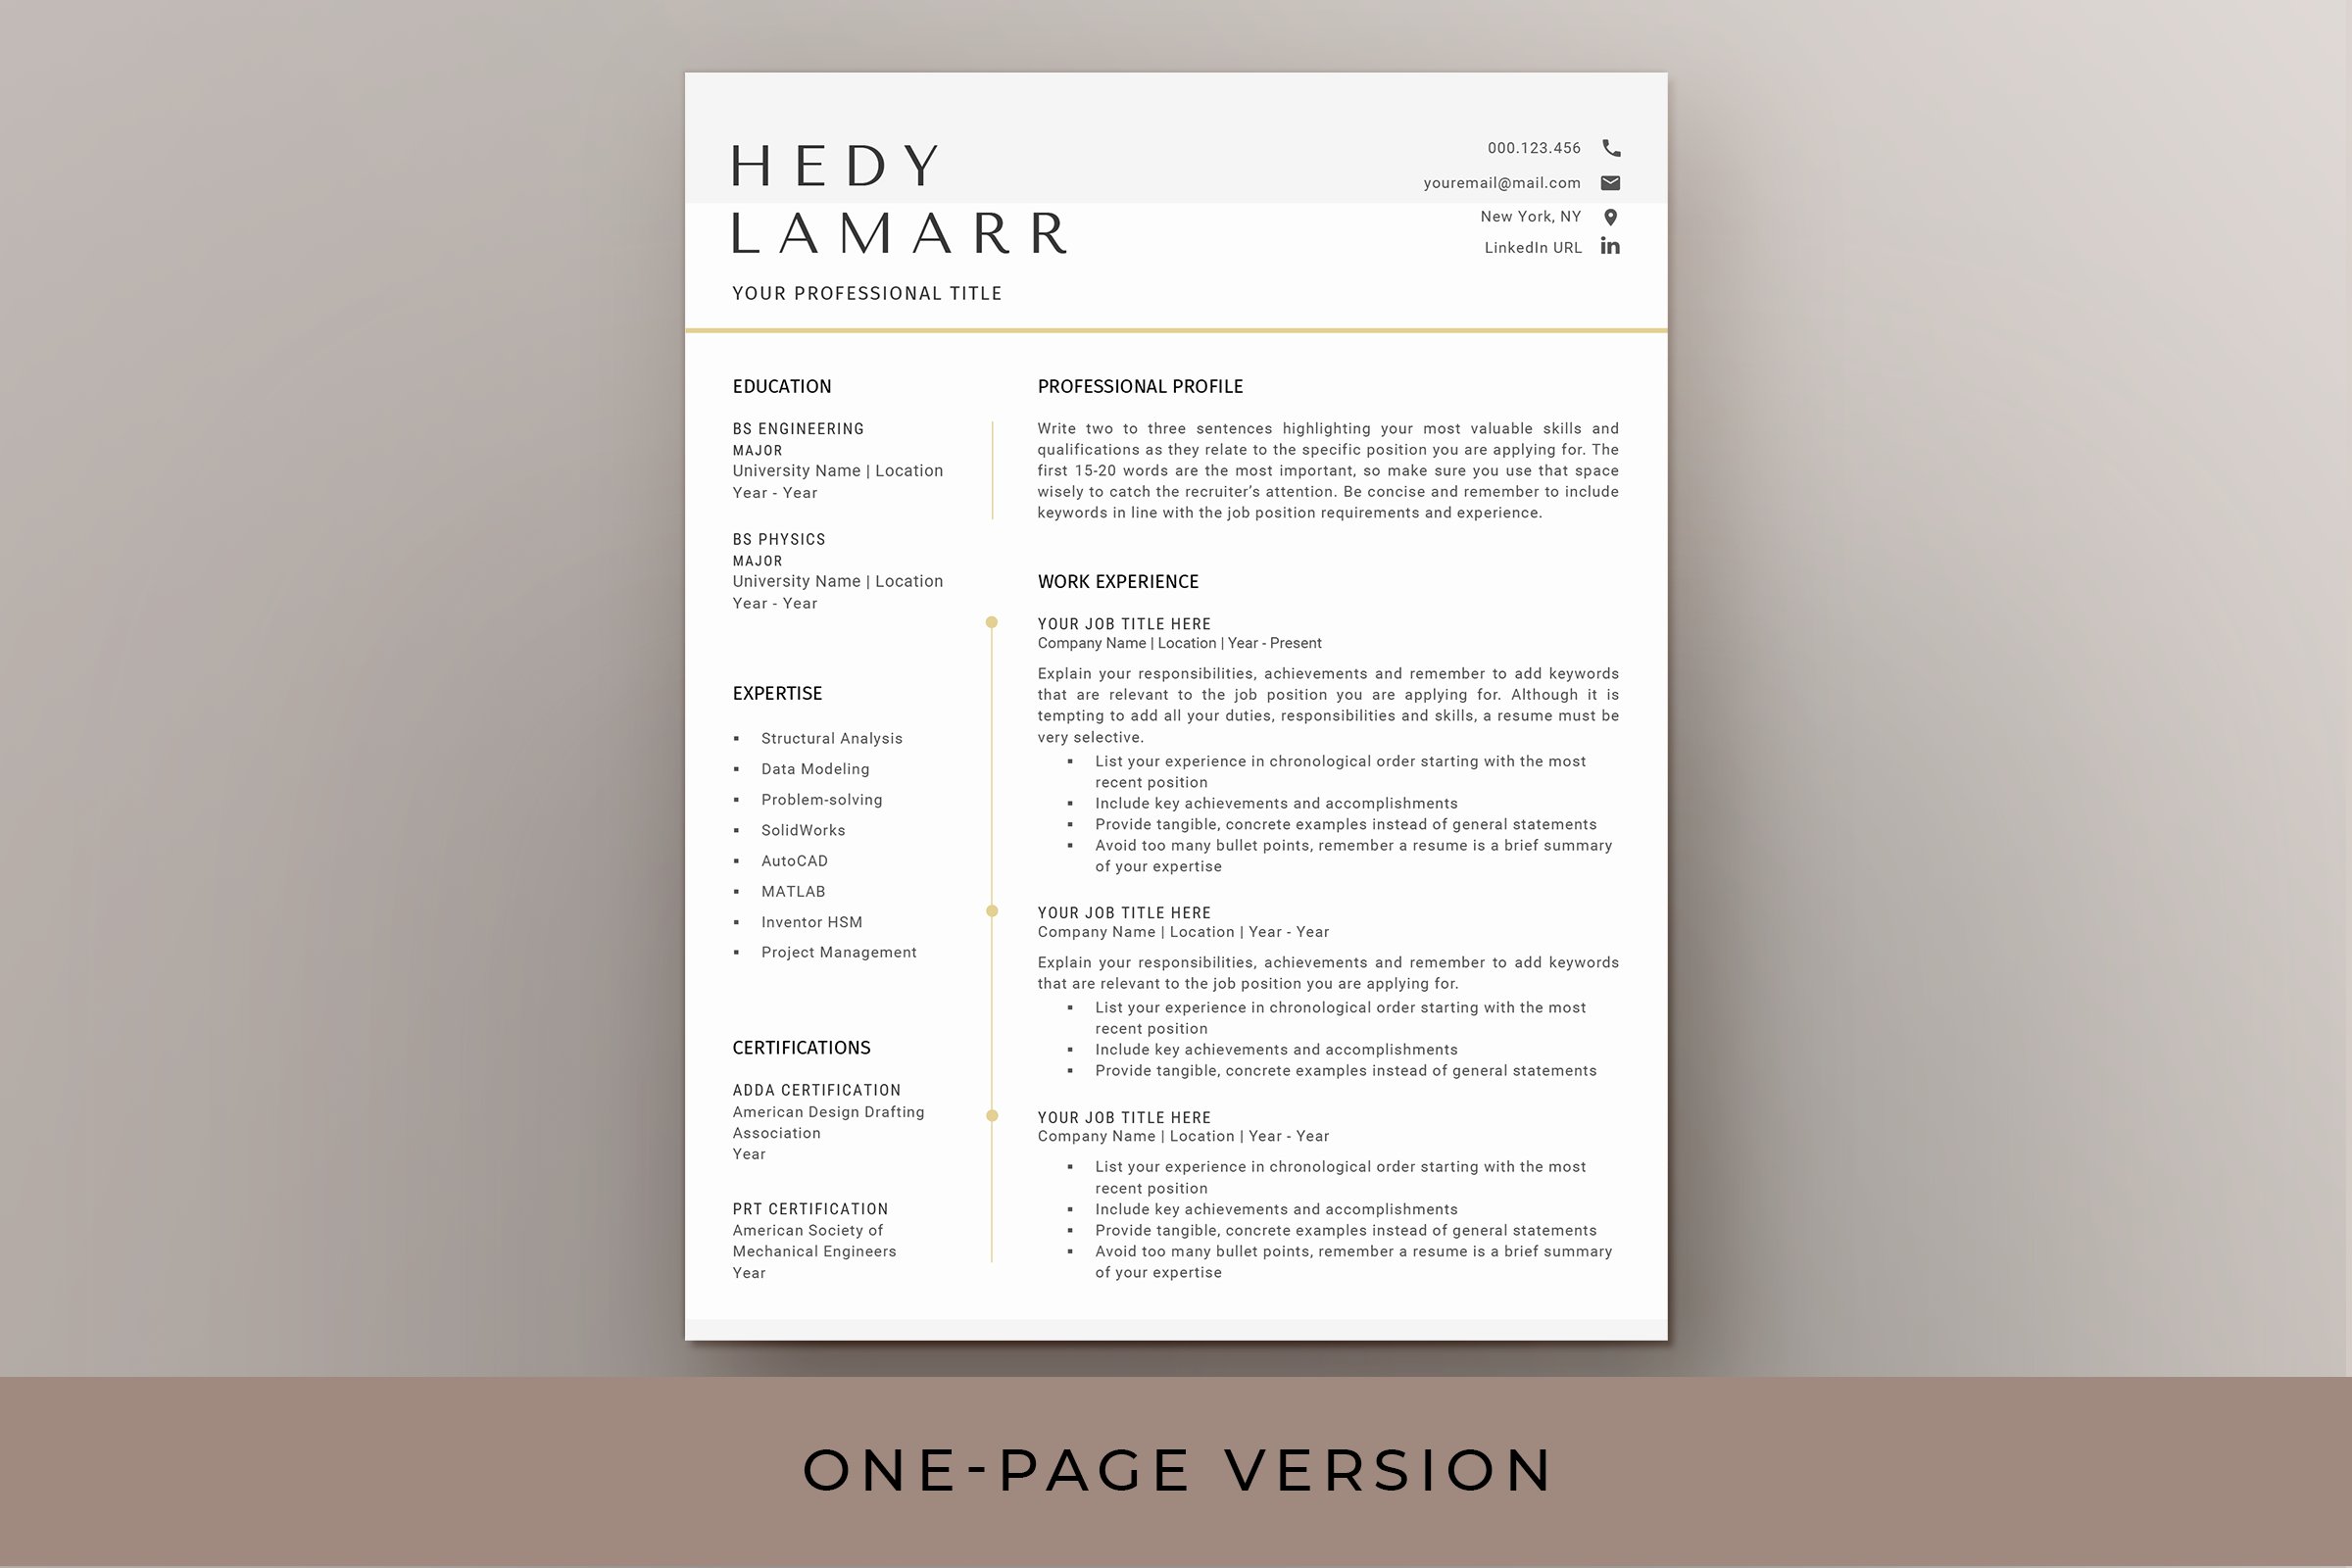 Engineer Resume & Cover Letter -Word preview image.